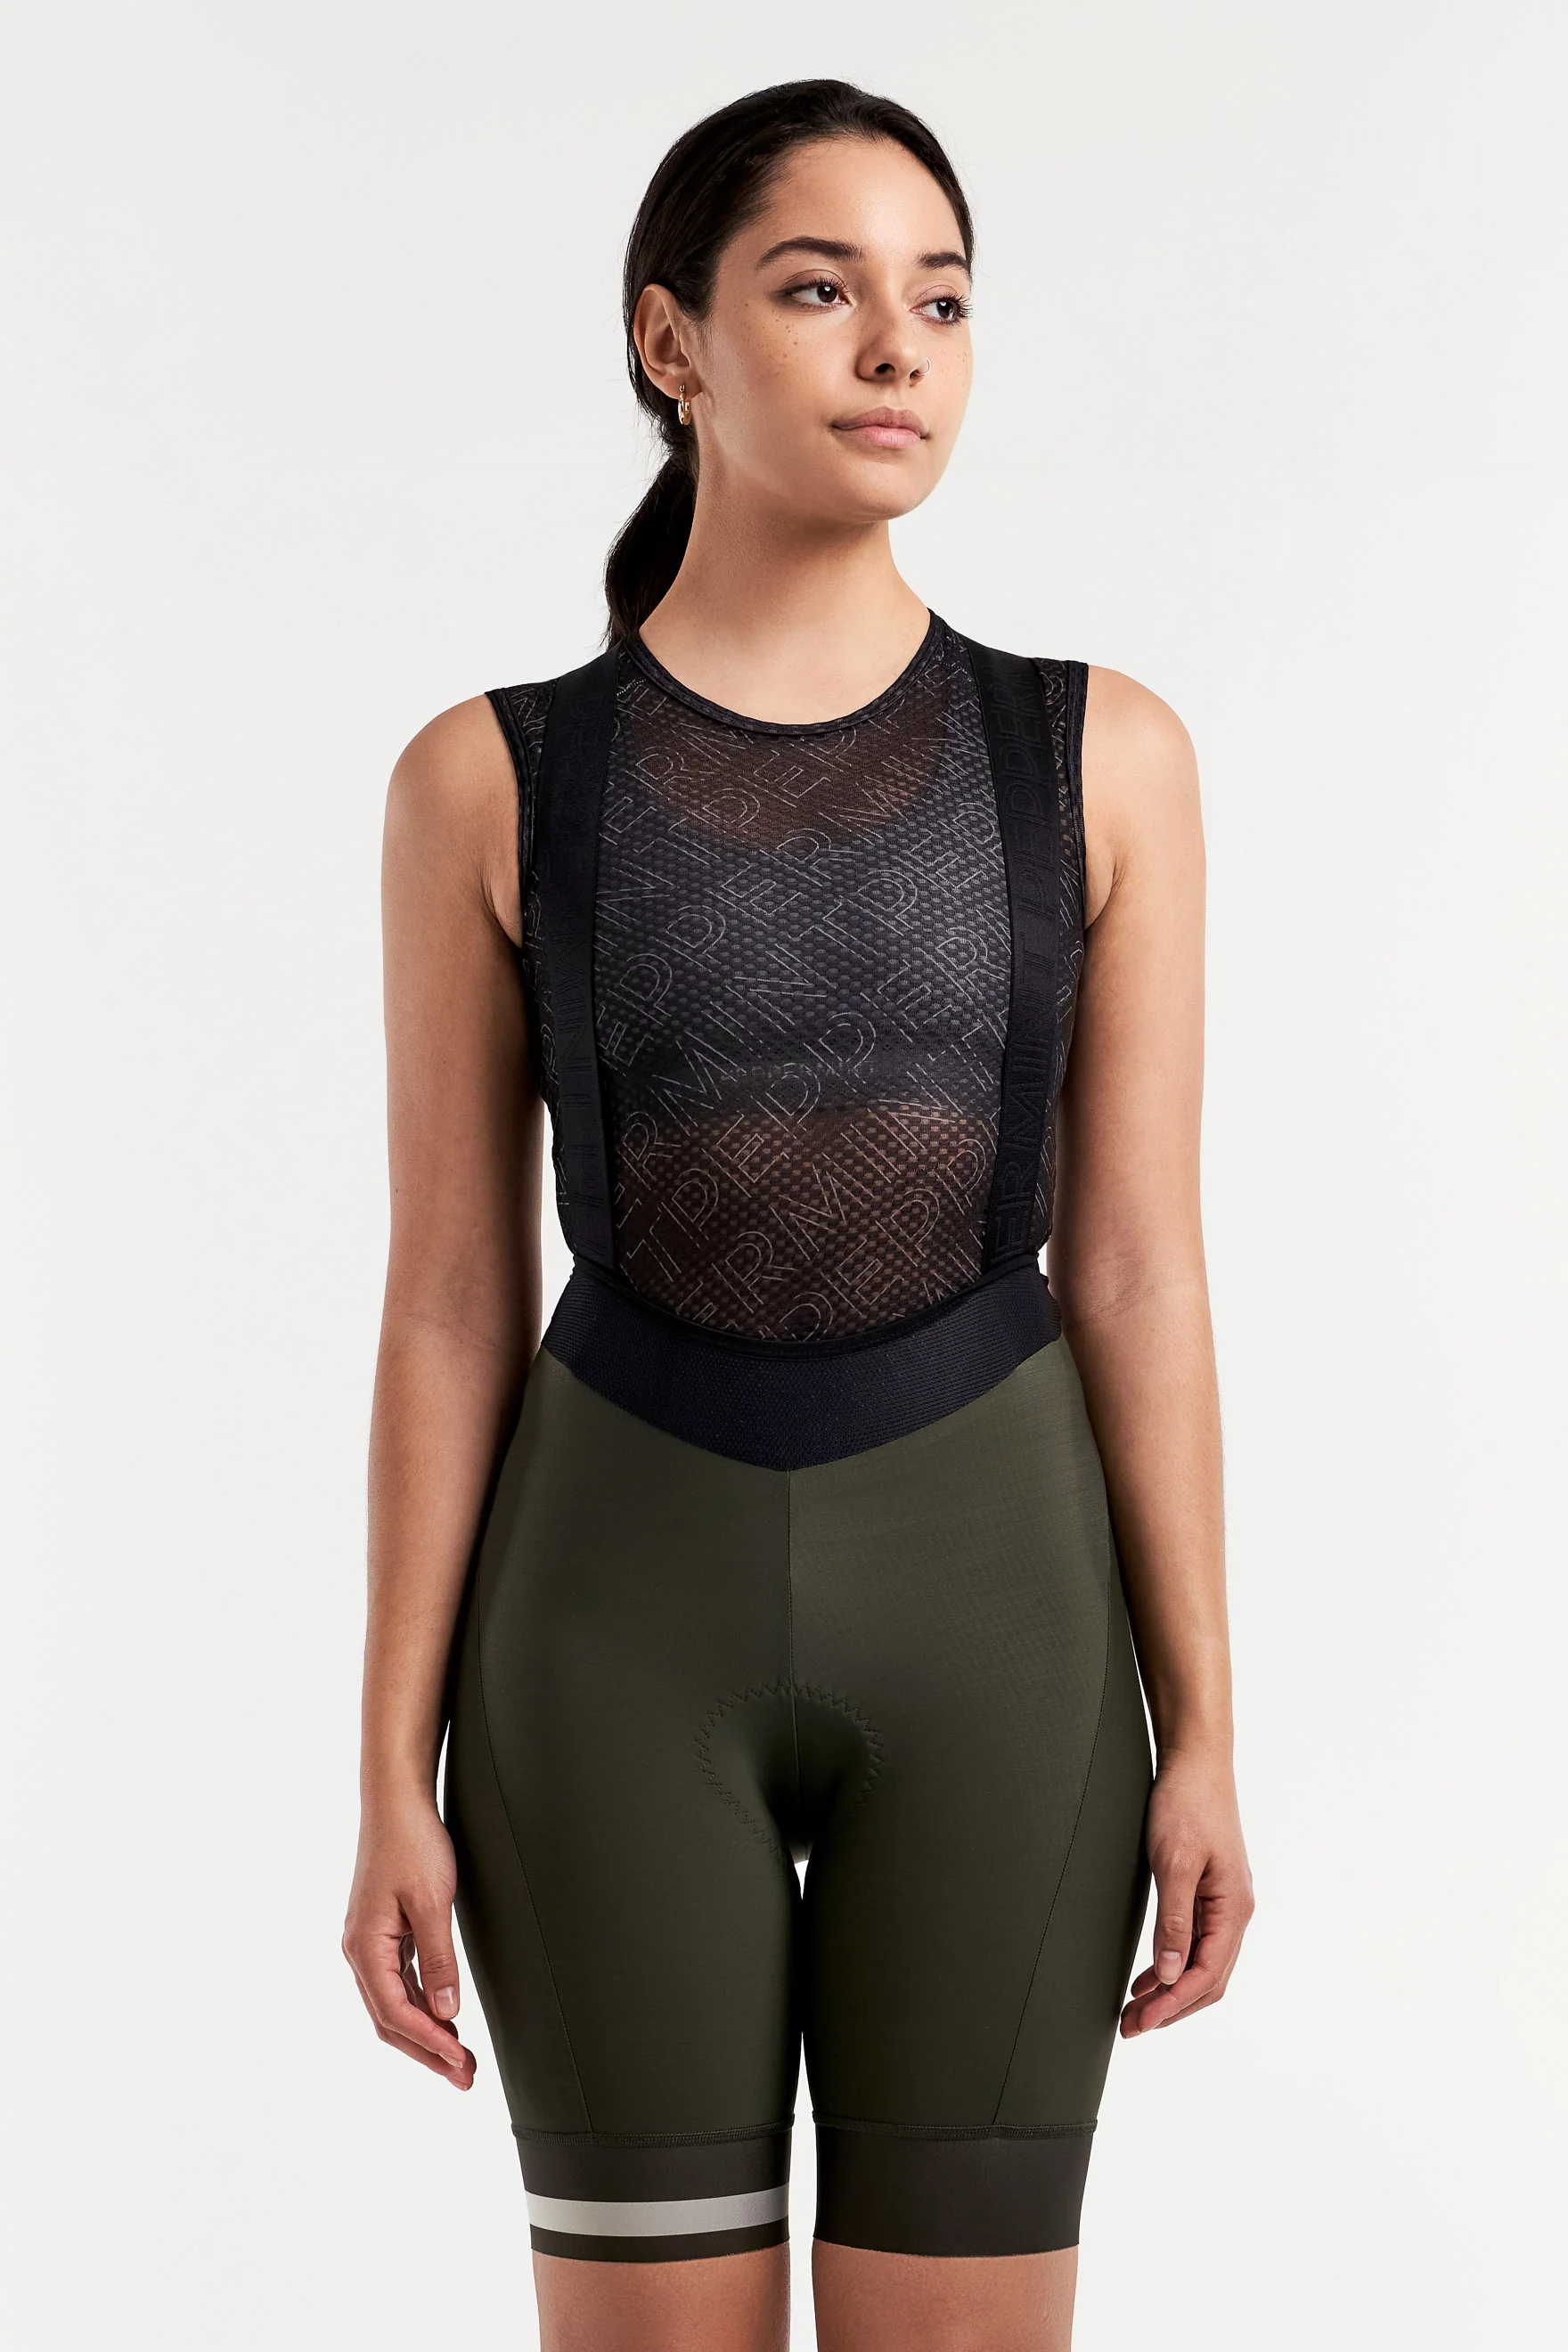 Shop for the Perfect Fit Shapewear from Popilush